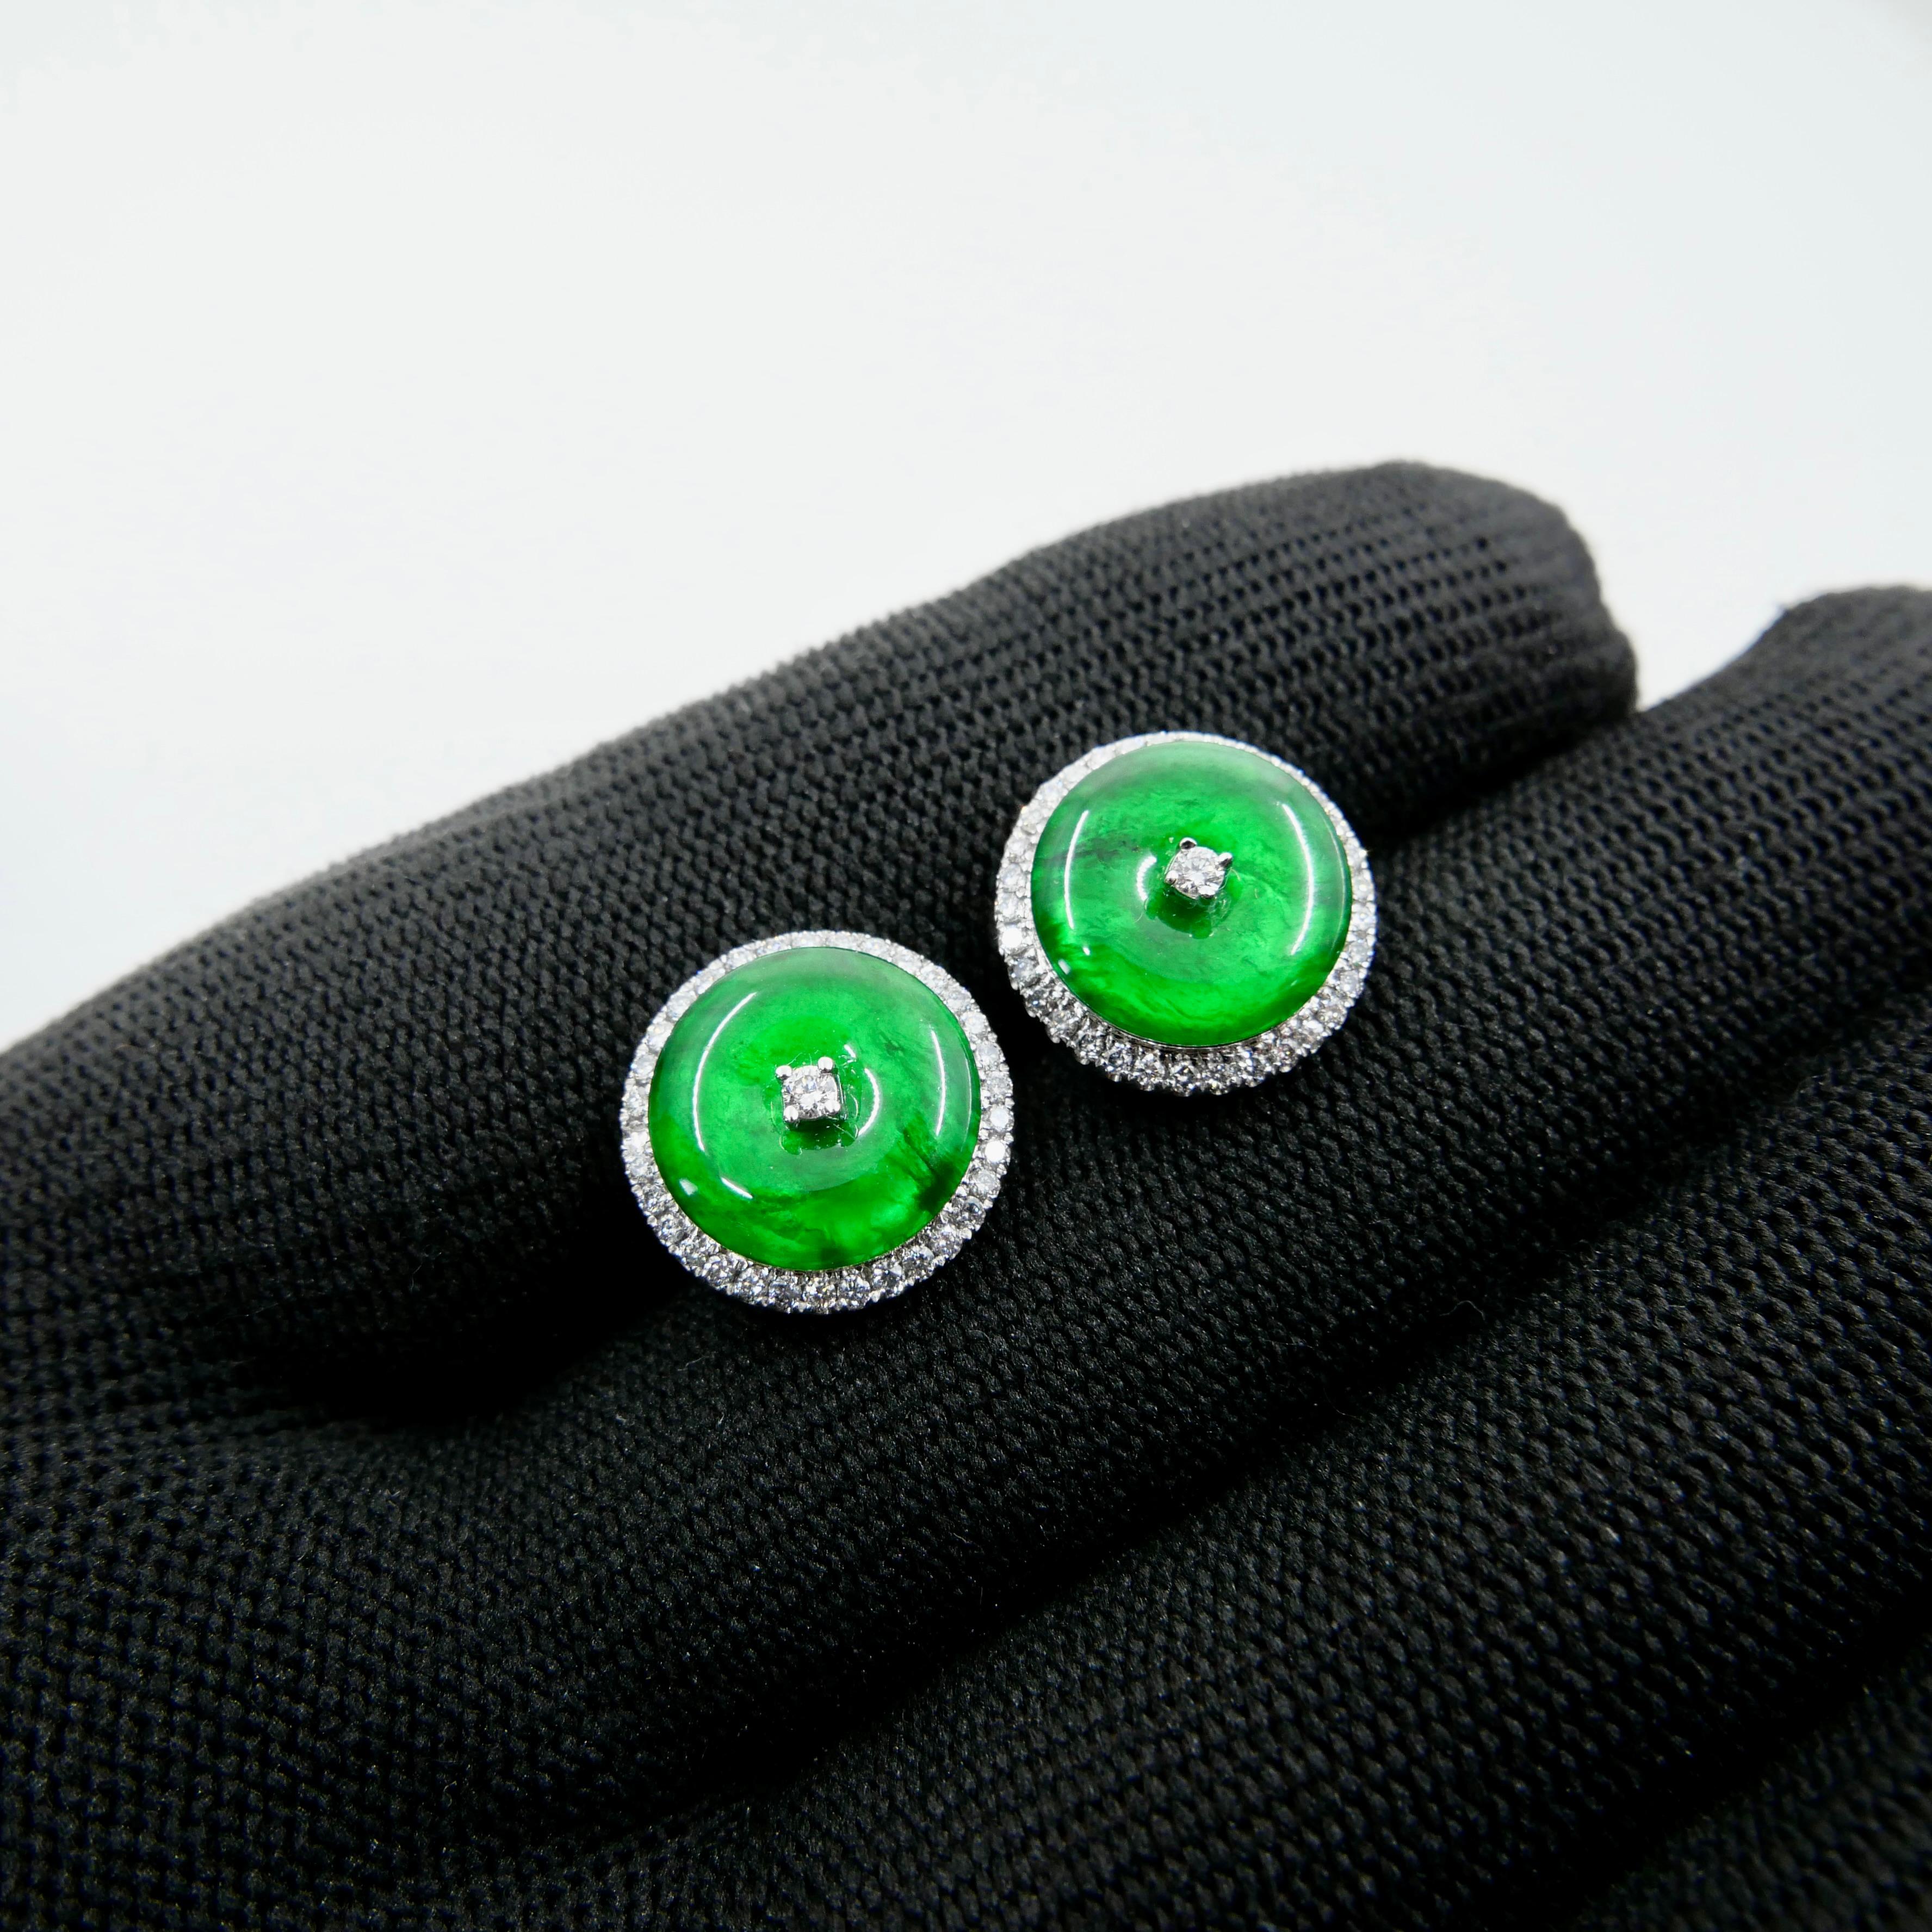 Round Cut Certified Natural Type A Jadeite Jade And Diamond Earrings. Apple Green Color For Sale